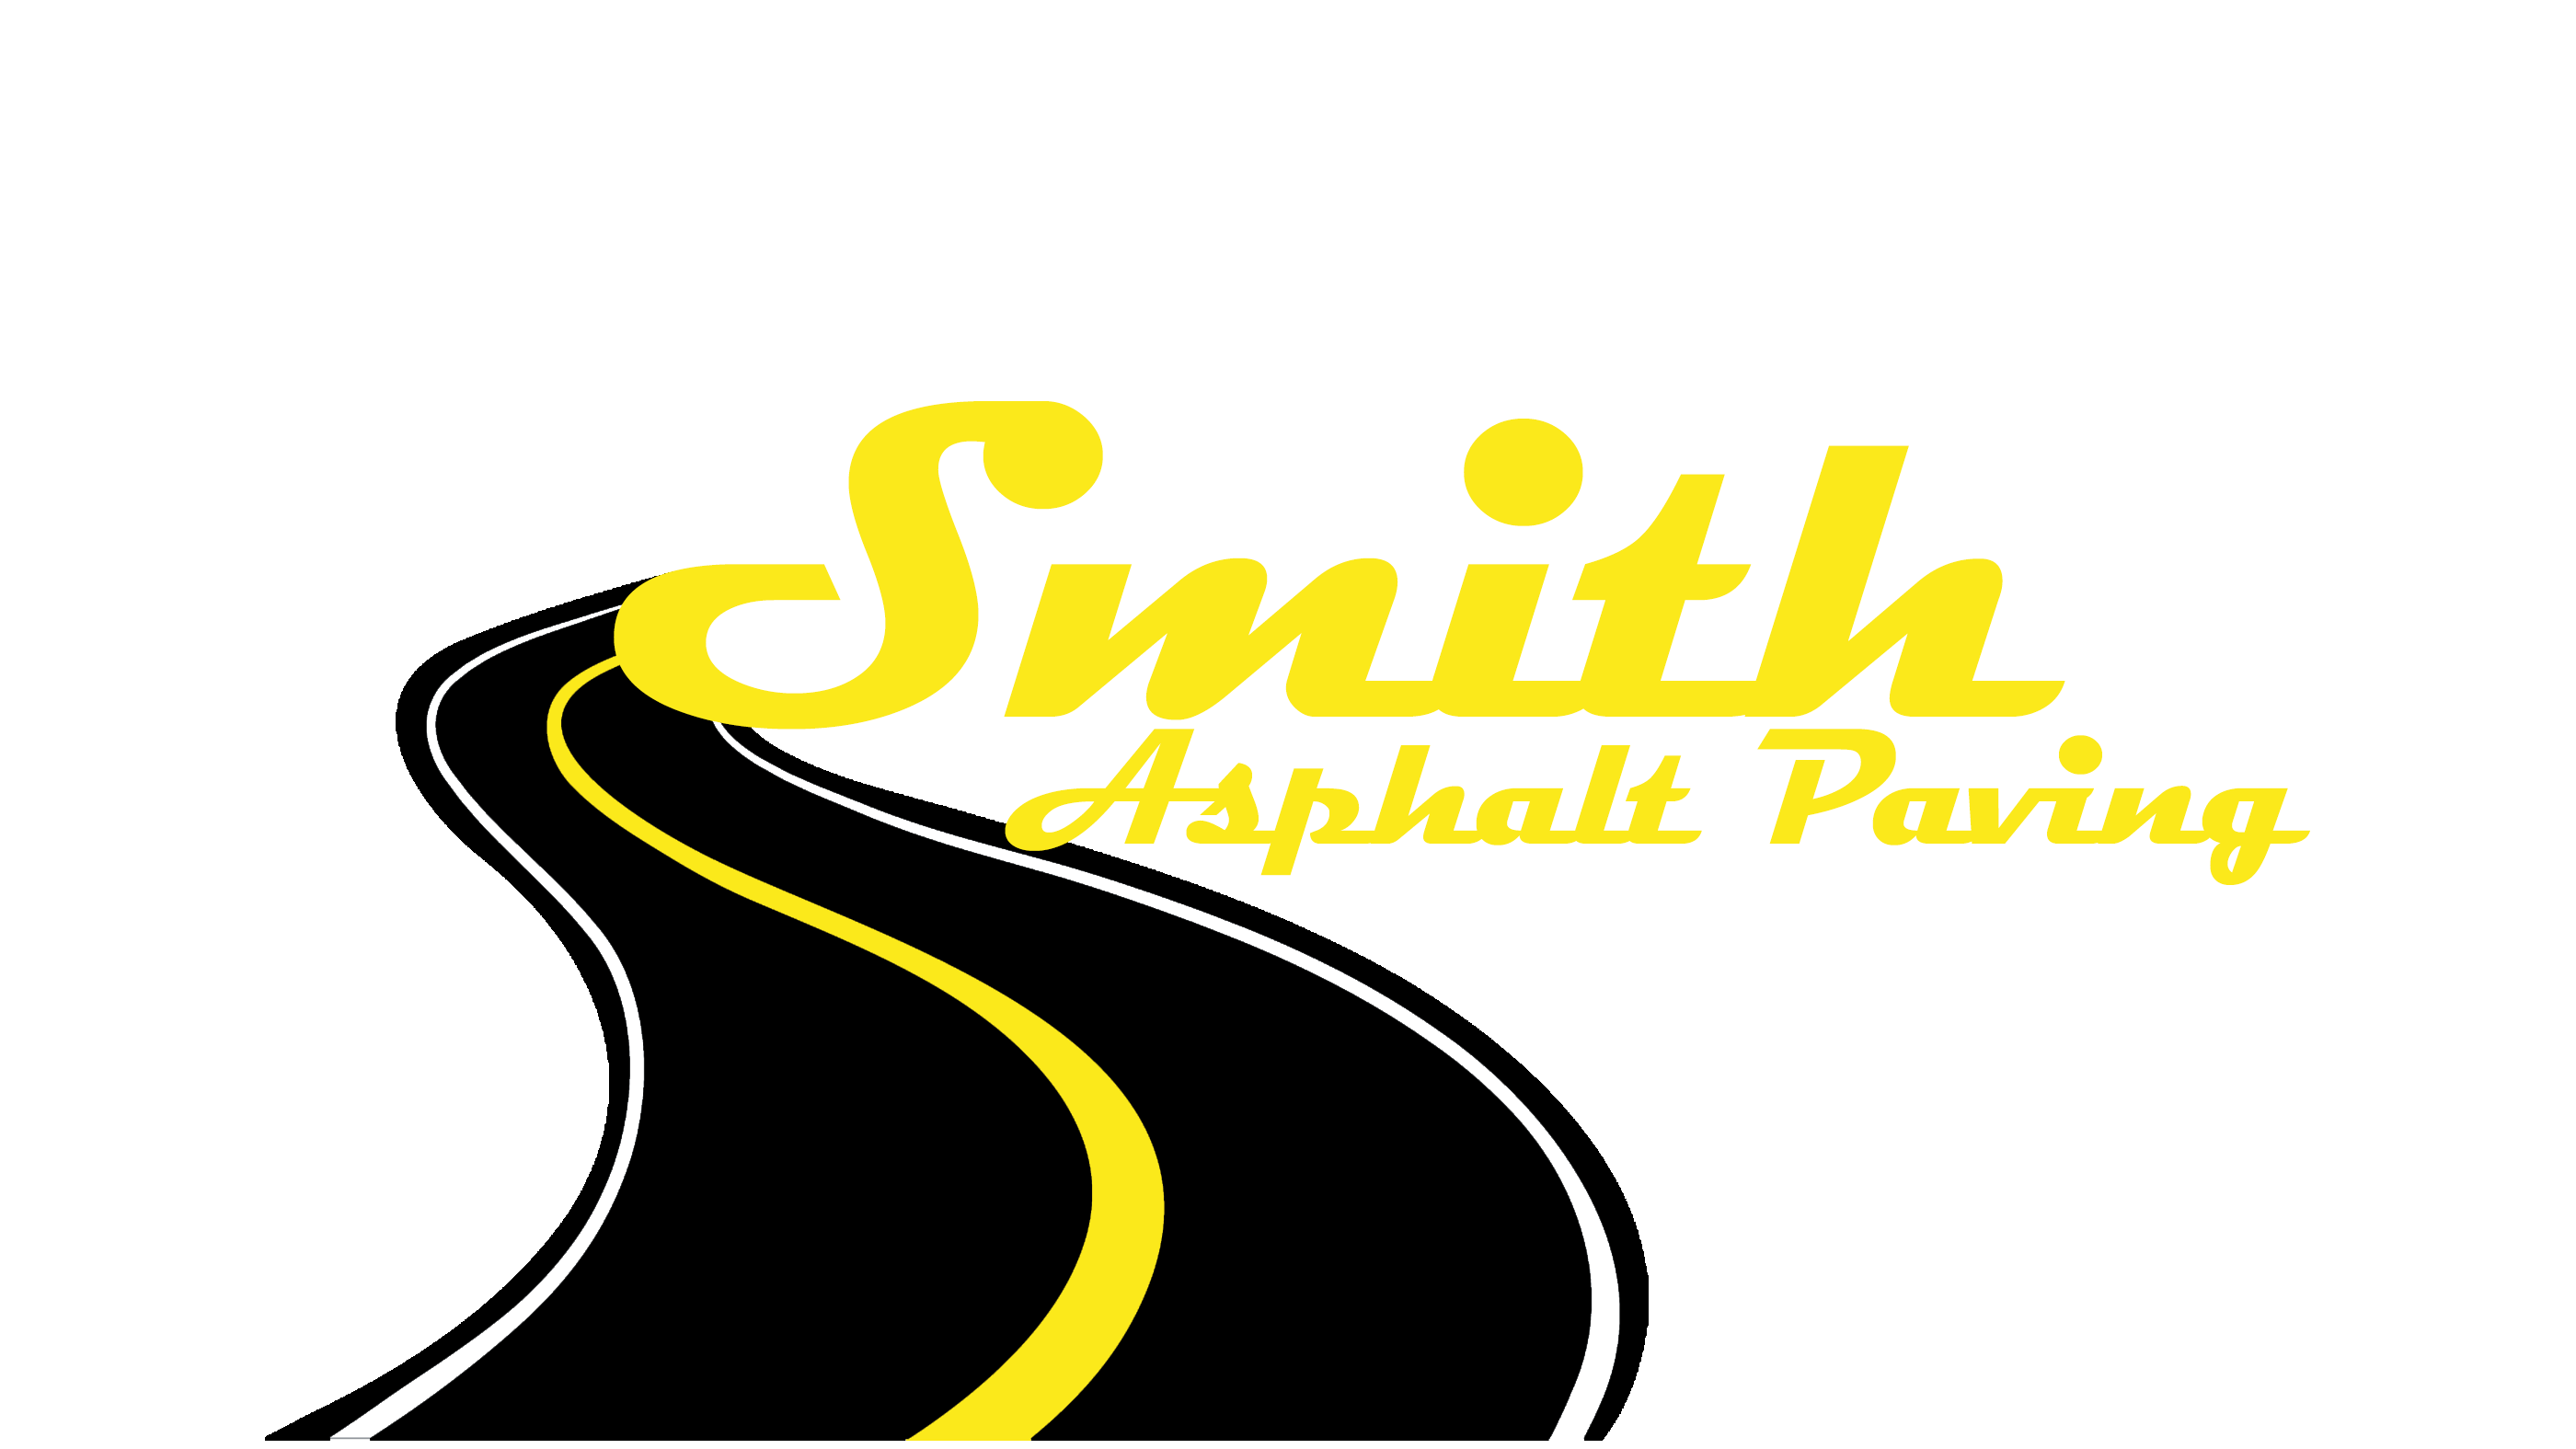 Smith Asphalt Parking Lot, Tar and Chip, and Driveway Paving